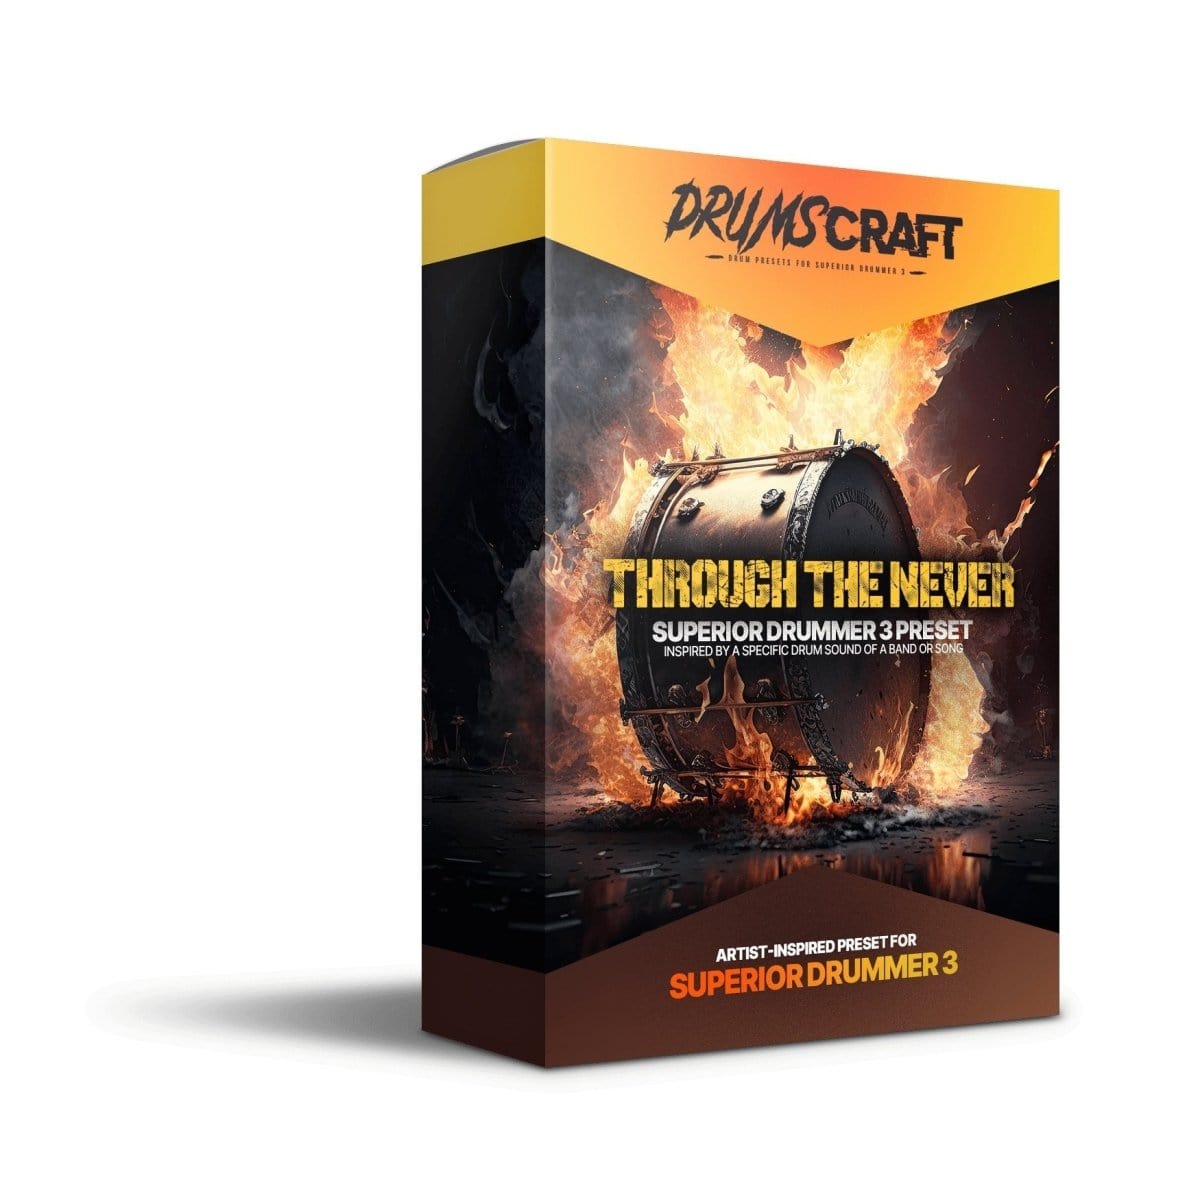 Through The Never - Superior Drummer 3 Presets by Develop Device